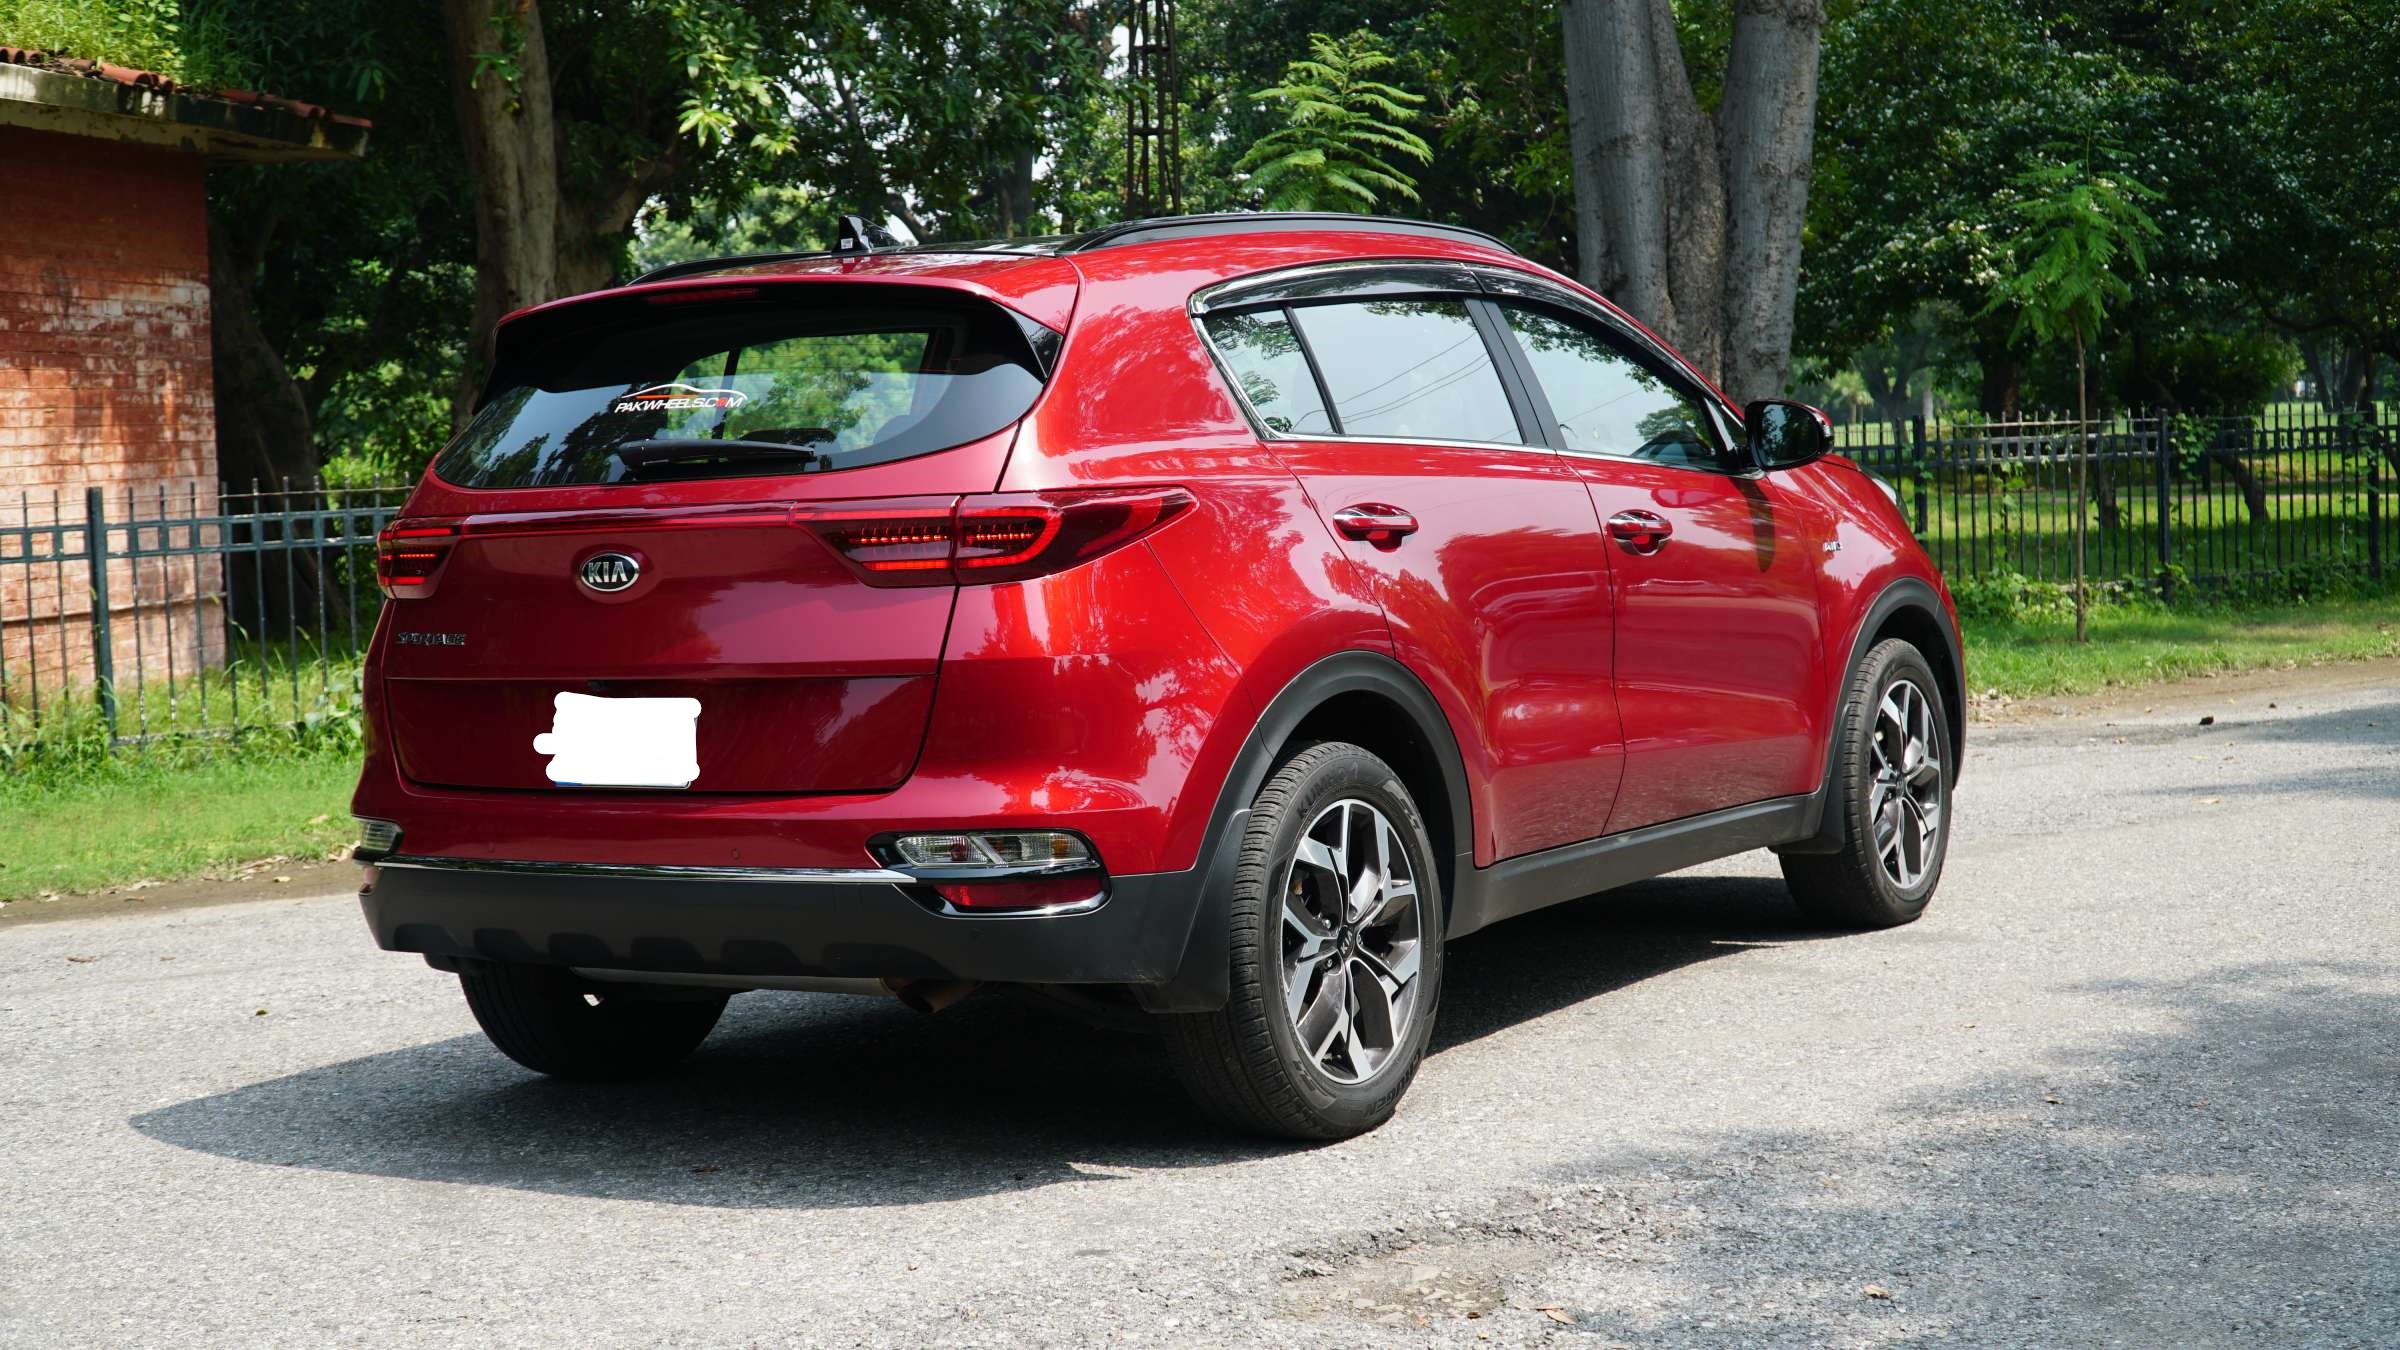 Limited Time Offer - Kia Sportage Price in Pakistan Reduced - PakWheels Blog